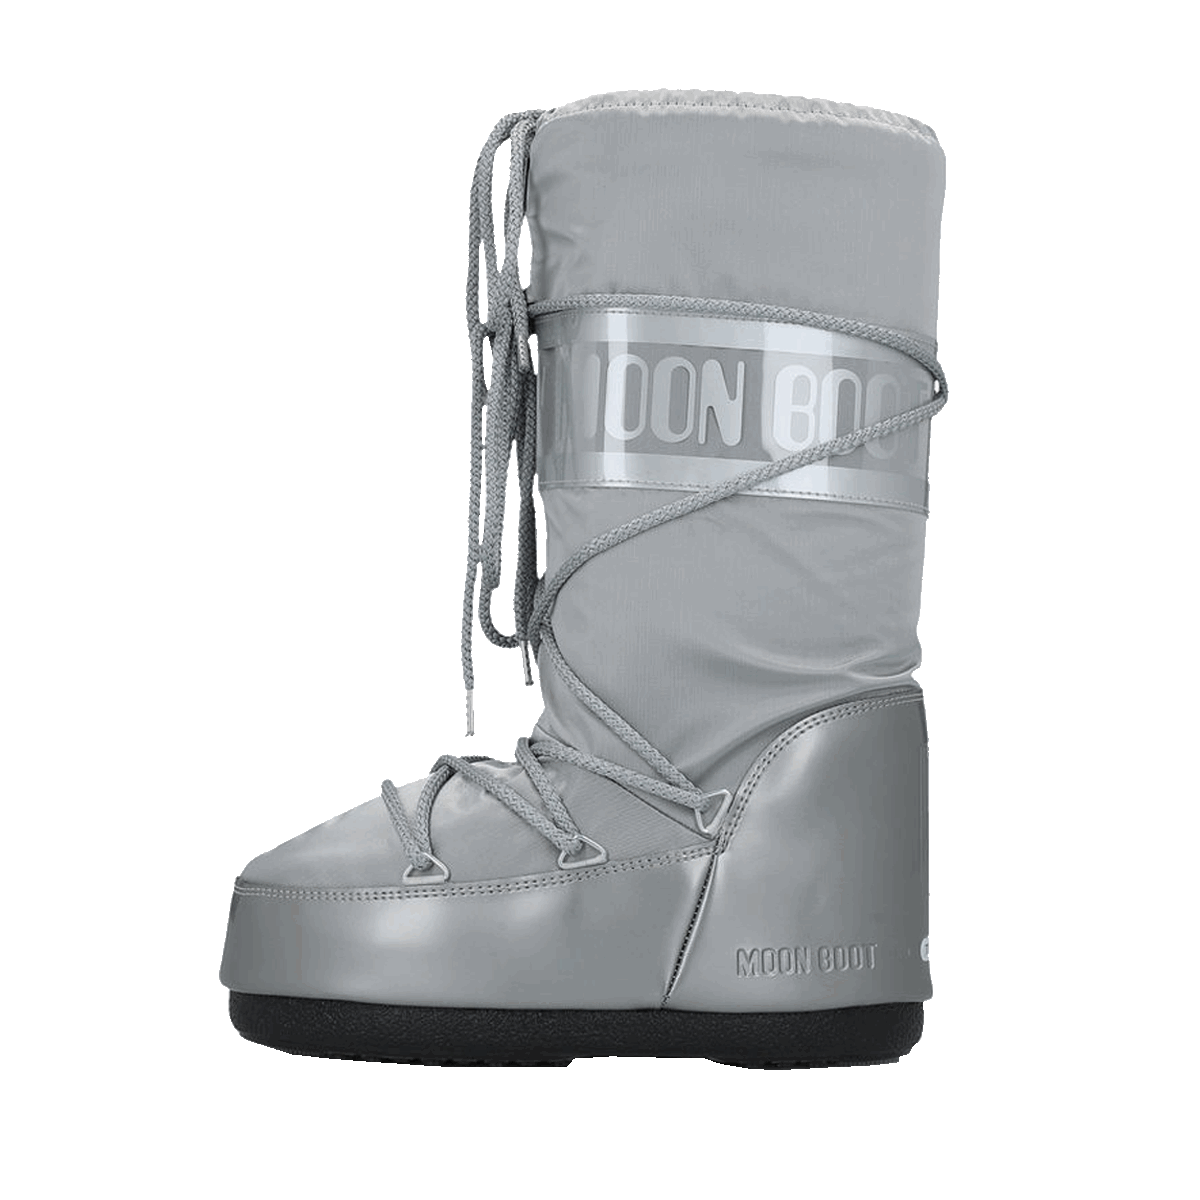 MOON BOOT GLANCE SILVER BOOT